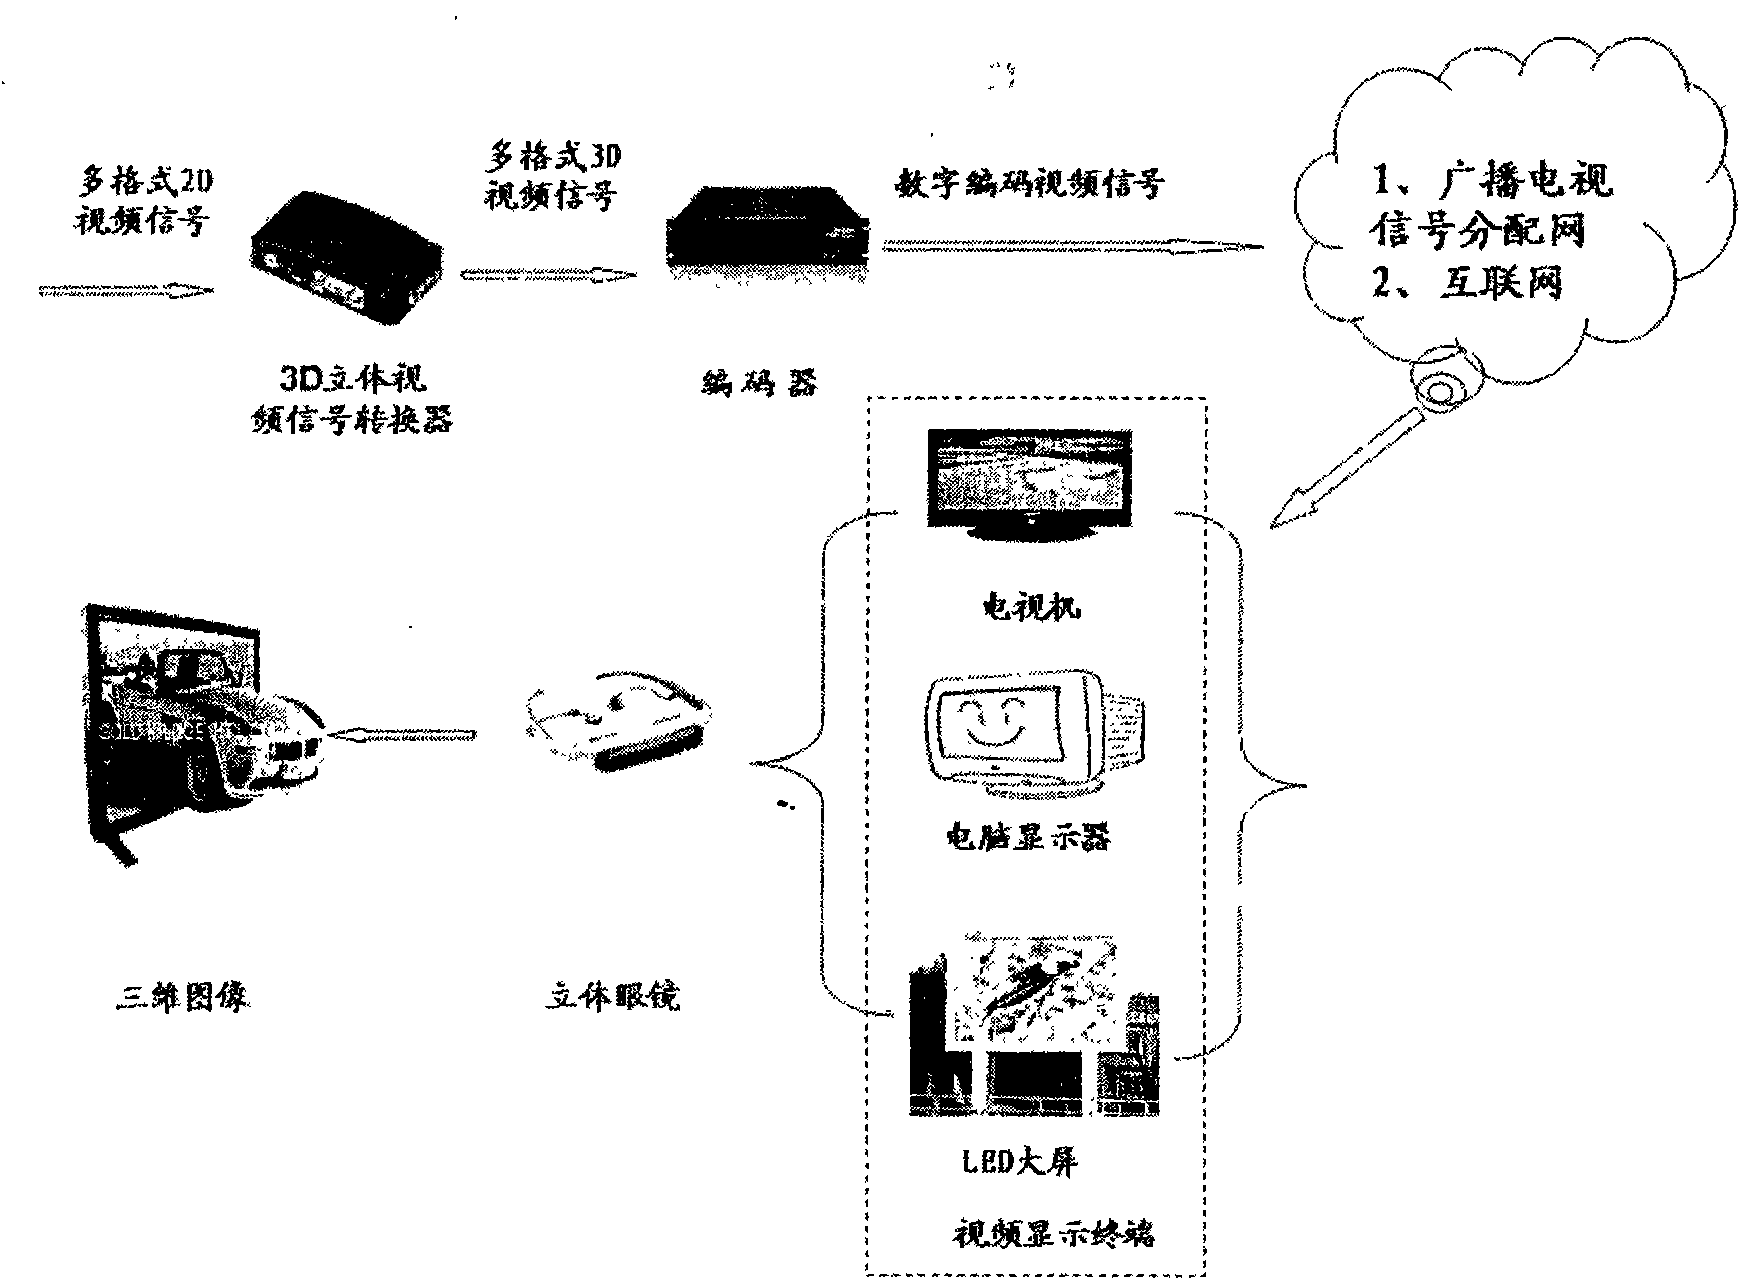 Technical scheme for transforming 2D video image signals to 3D video image signals and application thereof